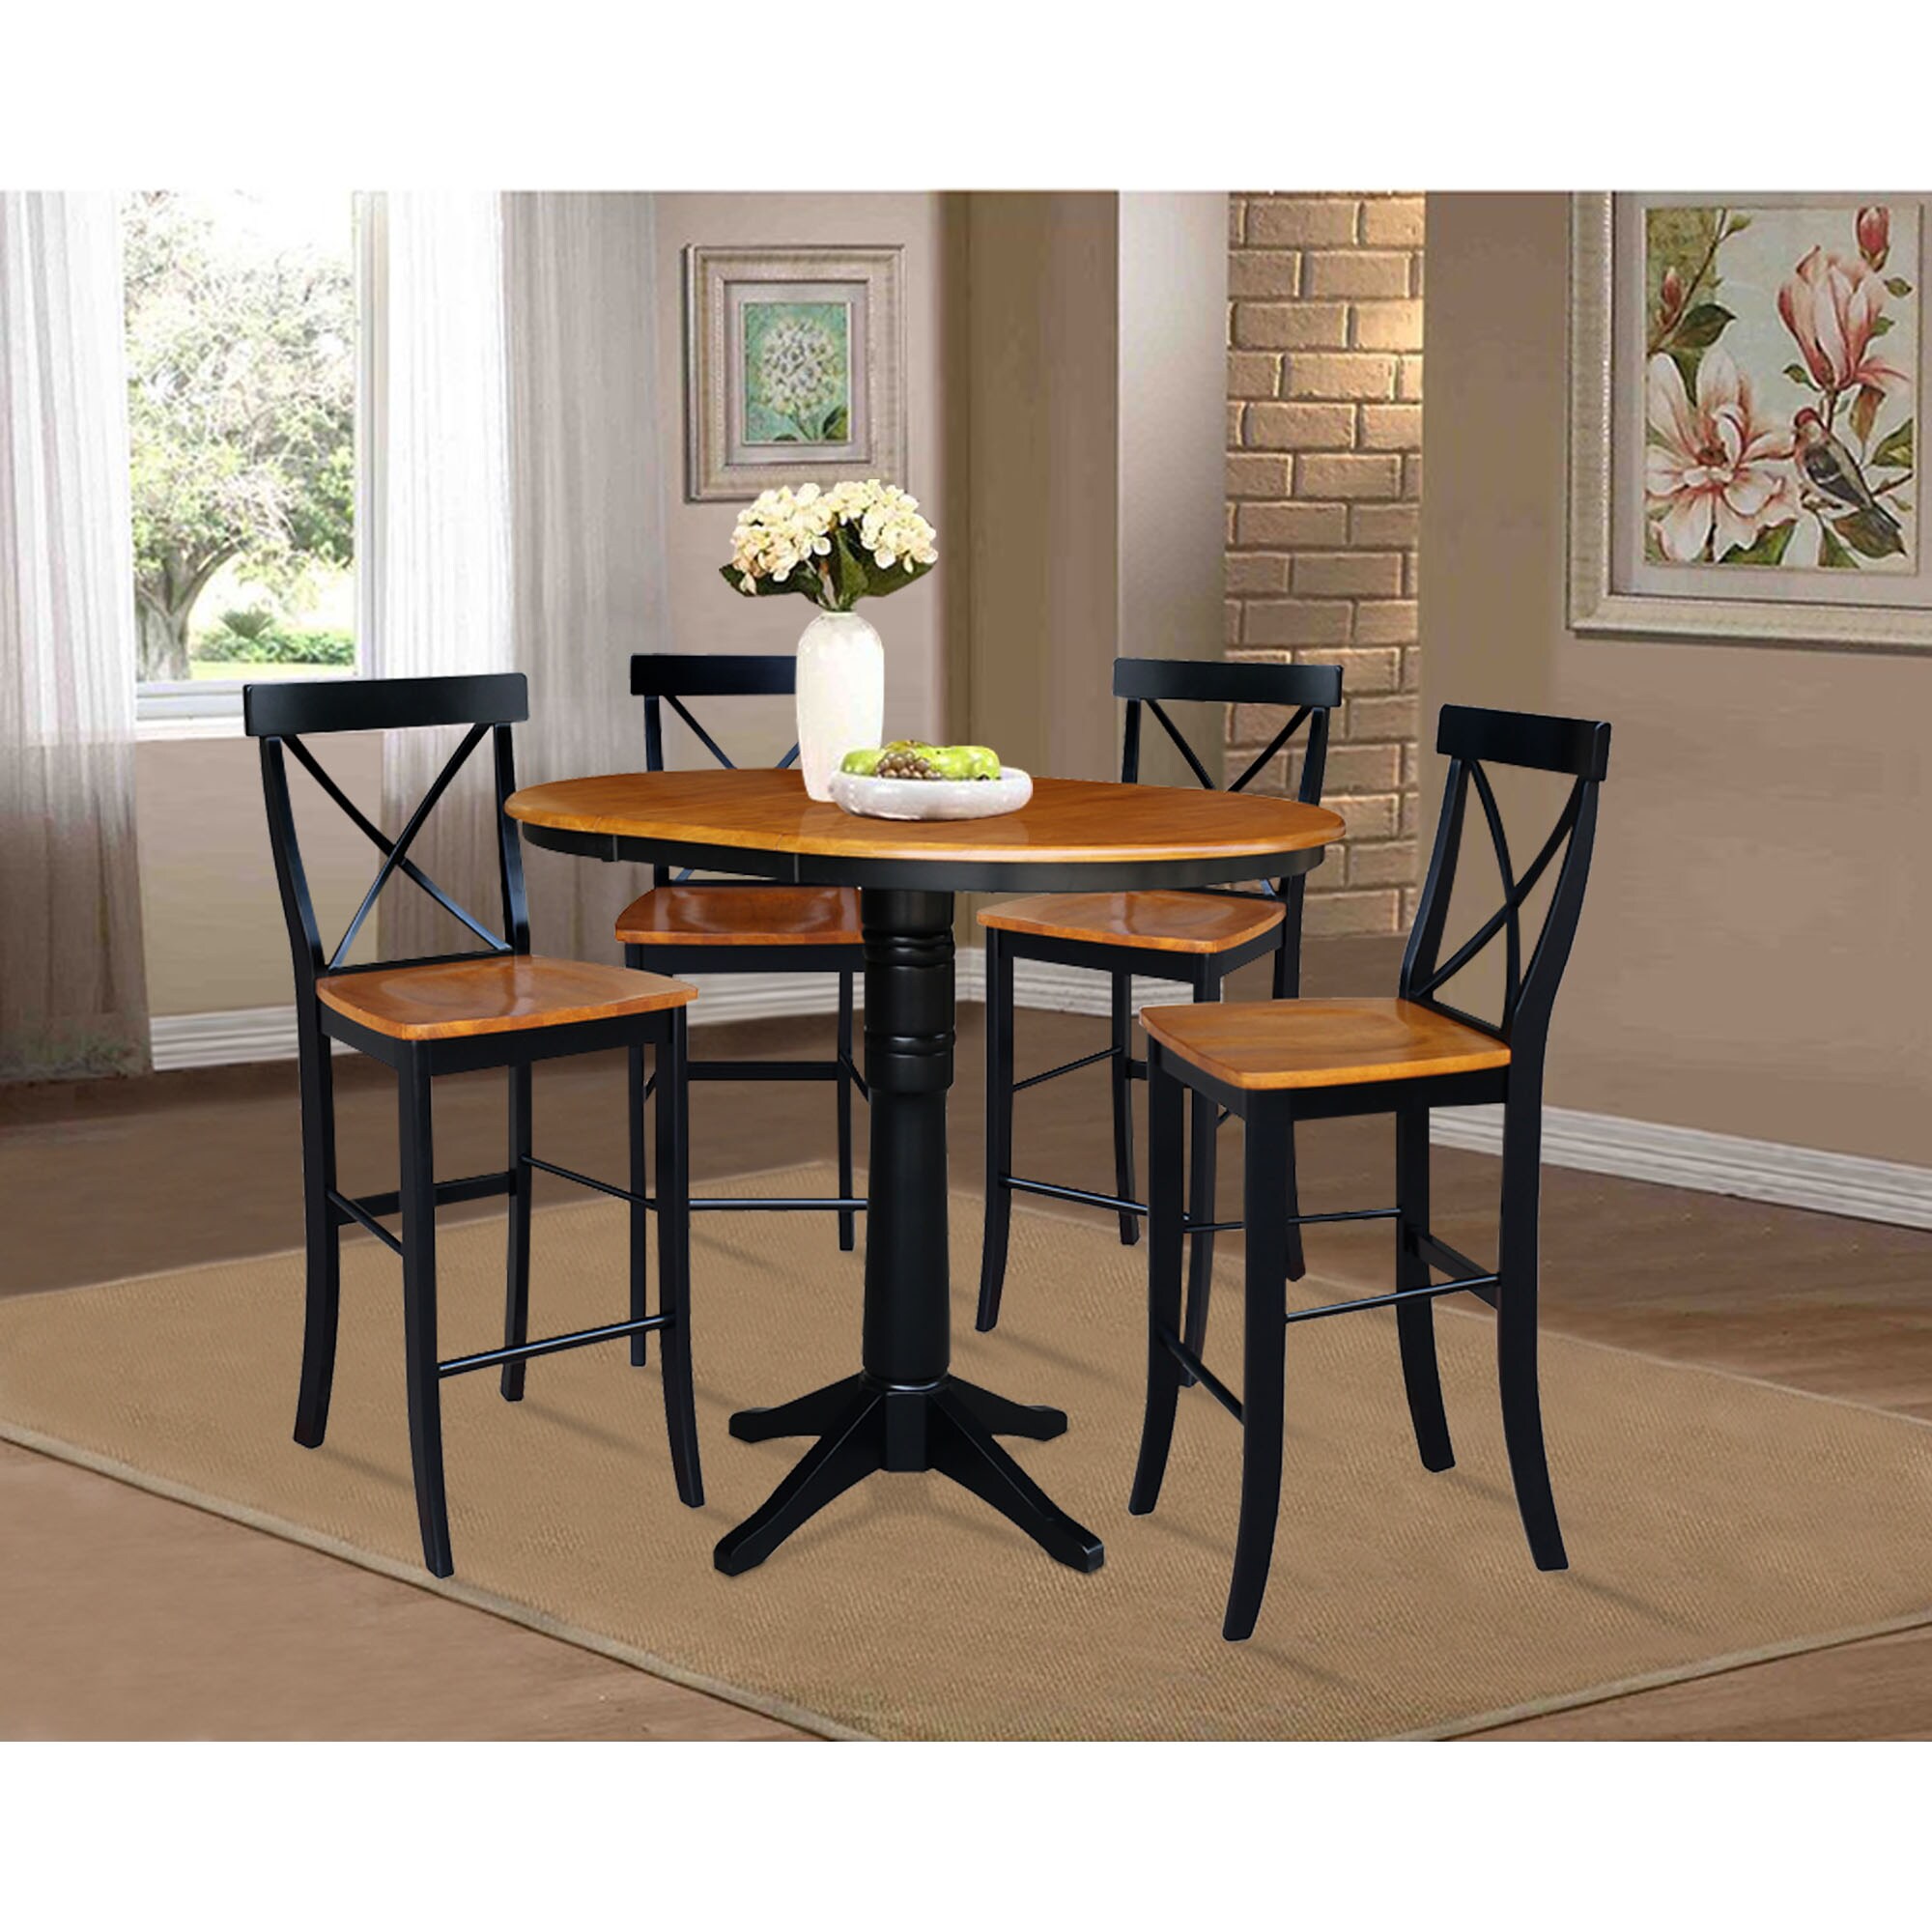 International Concepts Black/Cherry Traditional Dining Room Set with ...